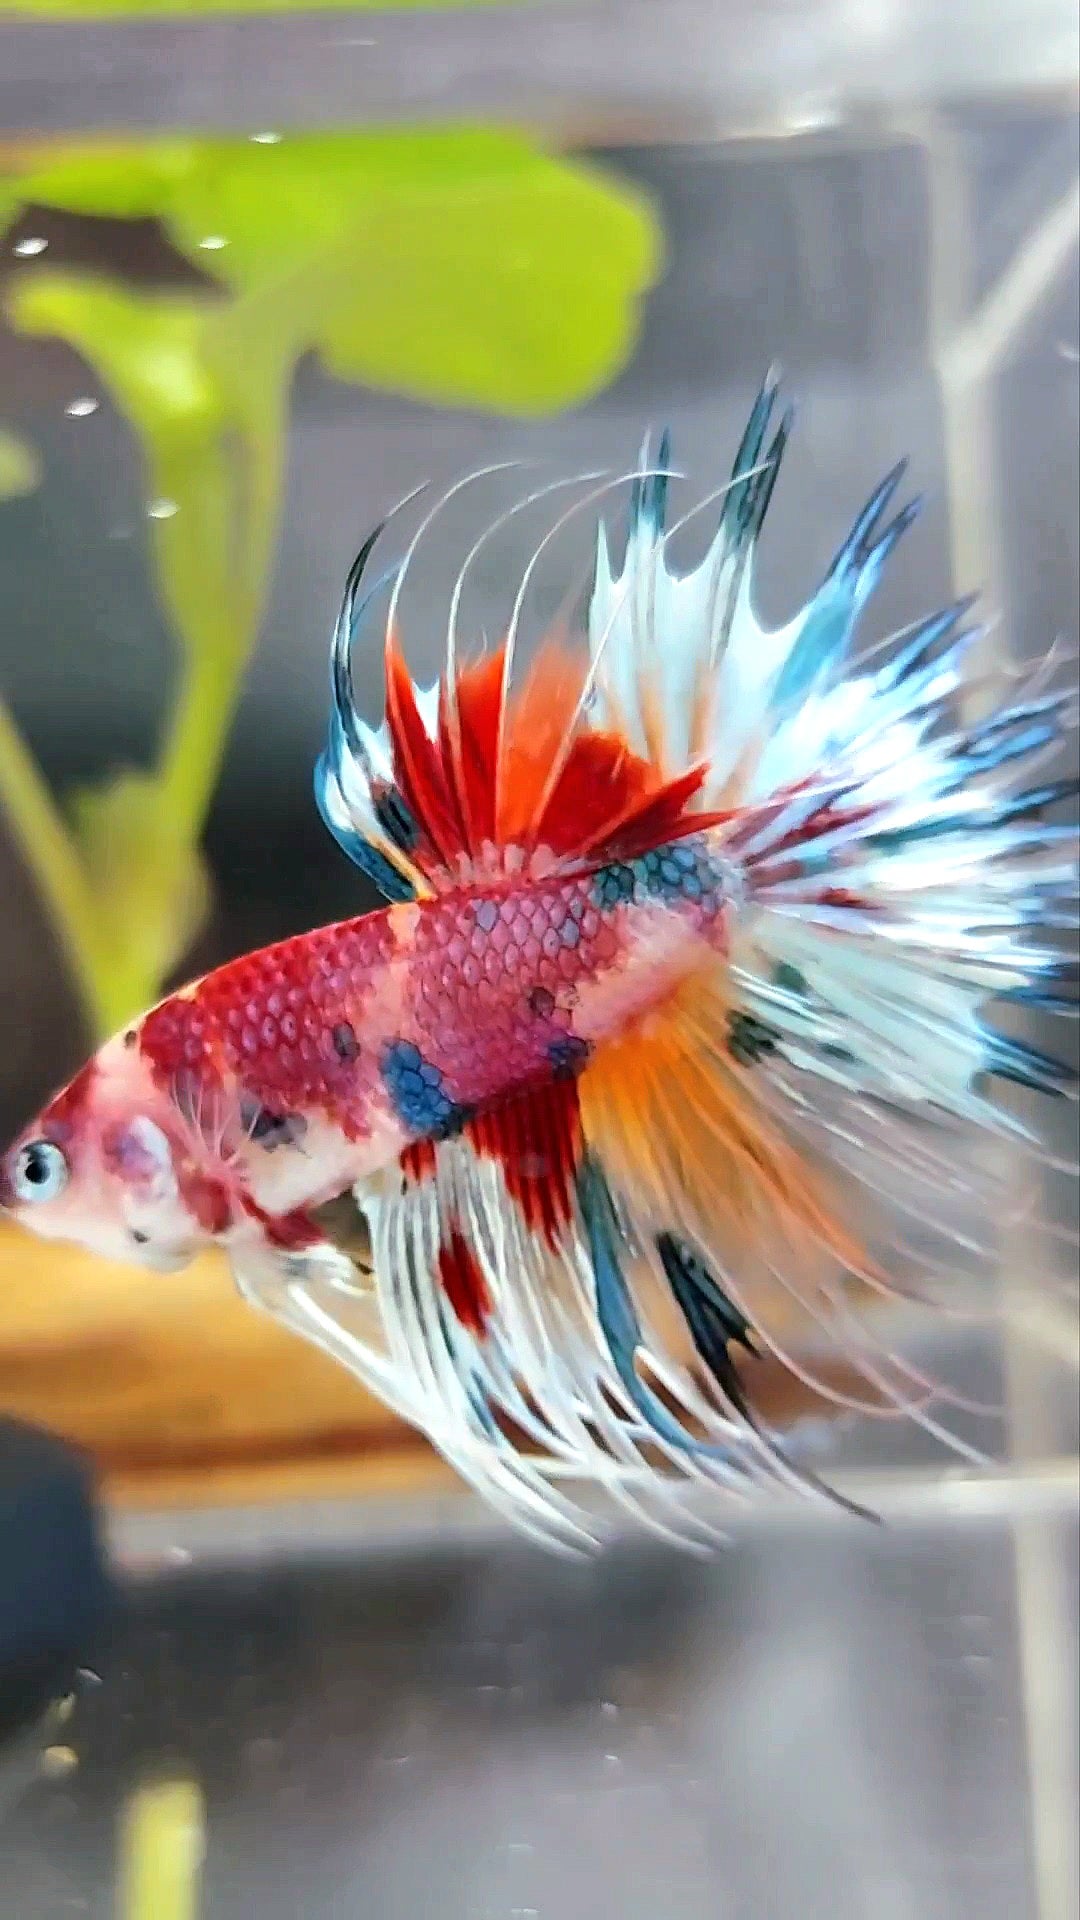 CROWNTAIL CANDY RAINBOW MULTICOLOR SELTENER BETTA-FISCH